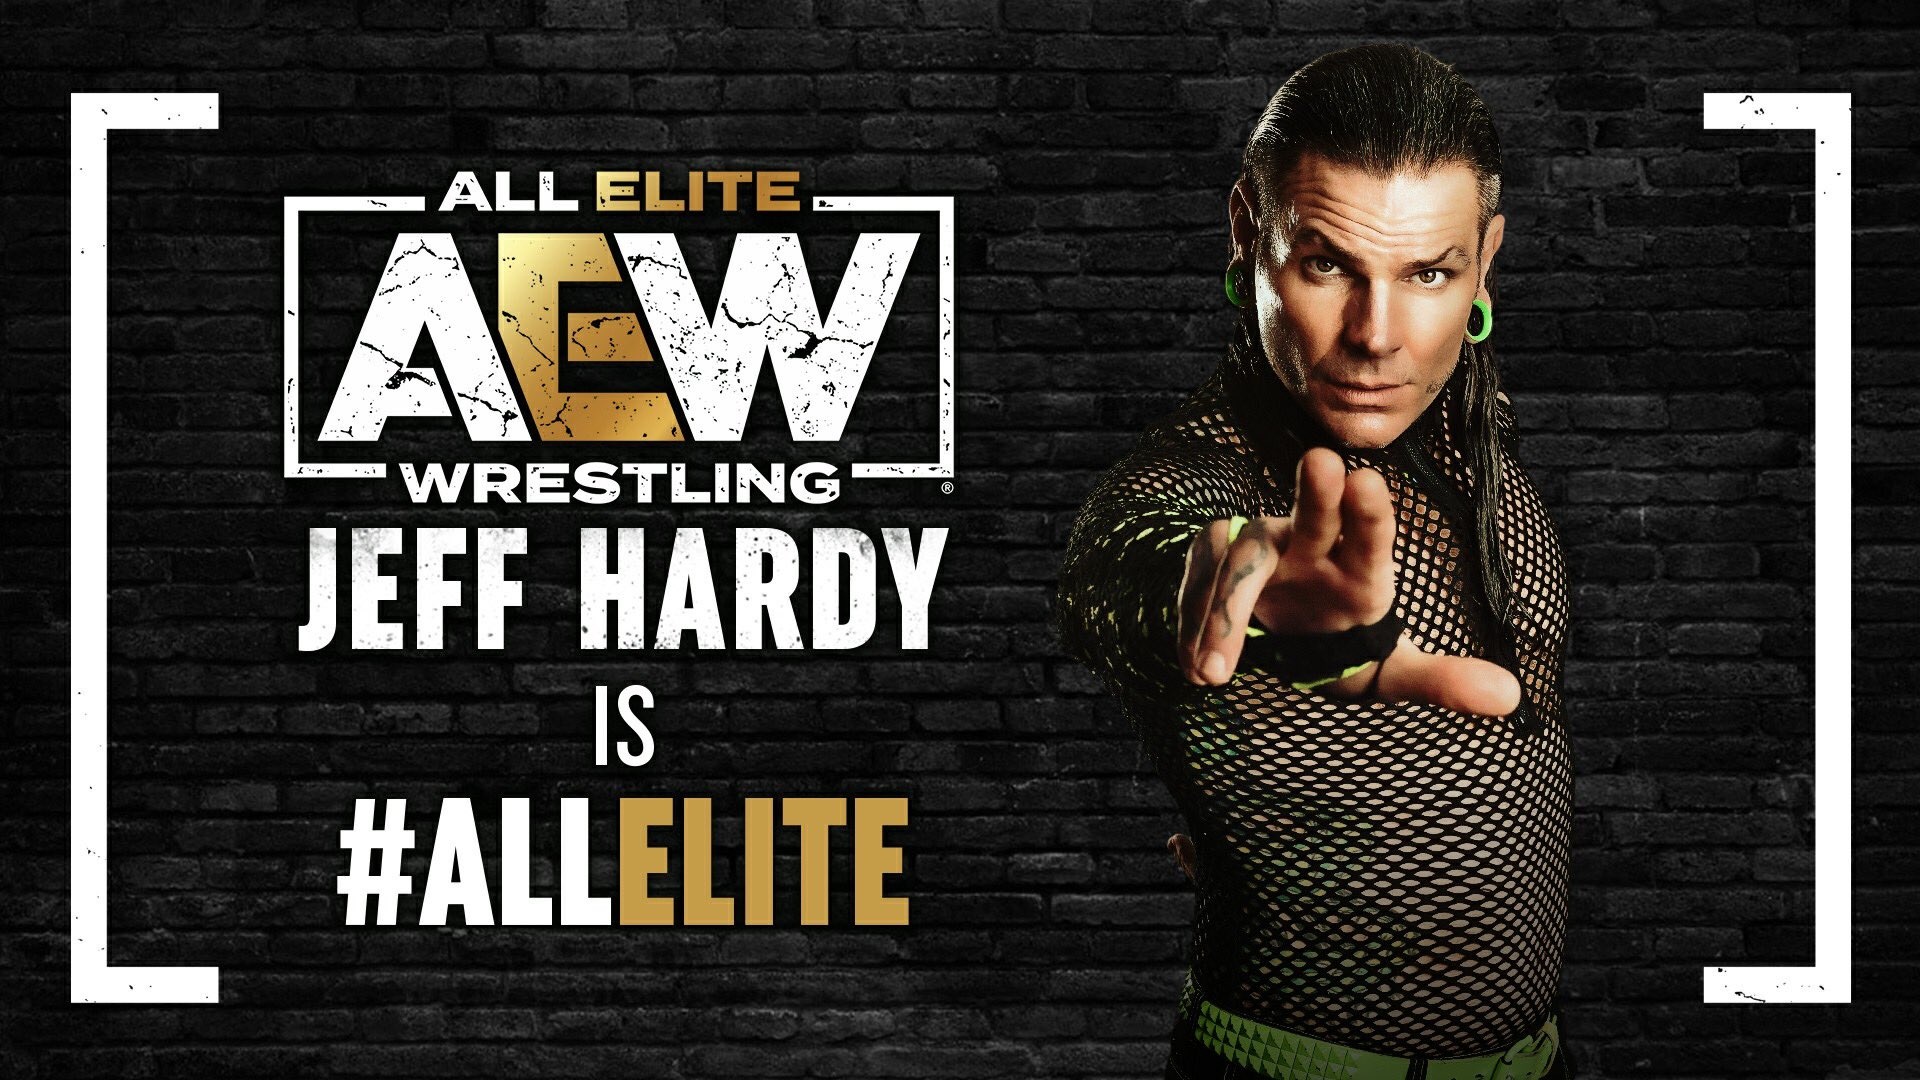 Jeff Hardy, Dream matches, AEW debut, Exciting matchups, 1920x1080 Full HD Desktop